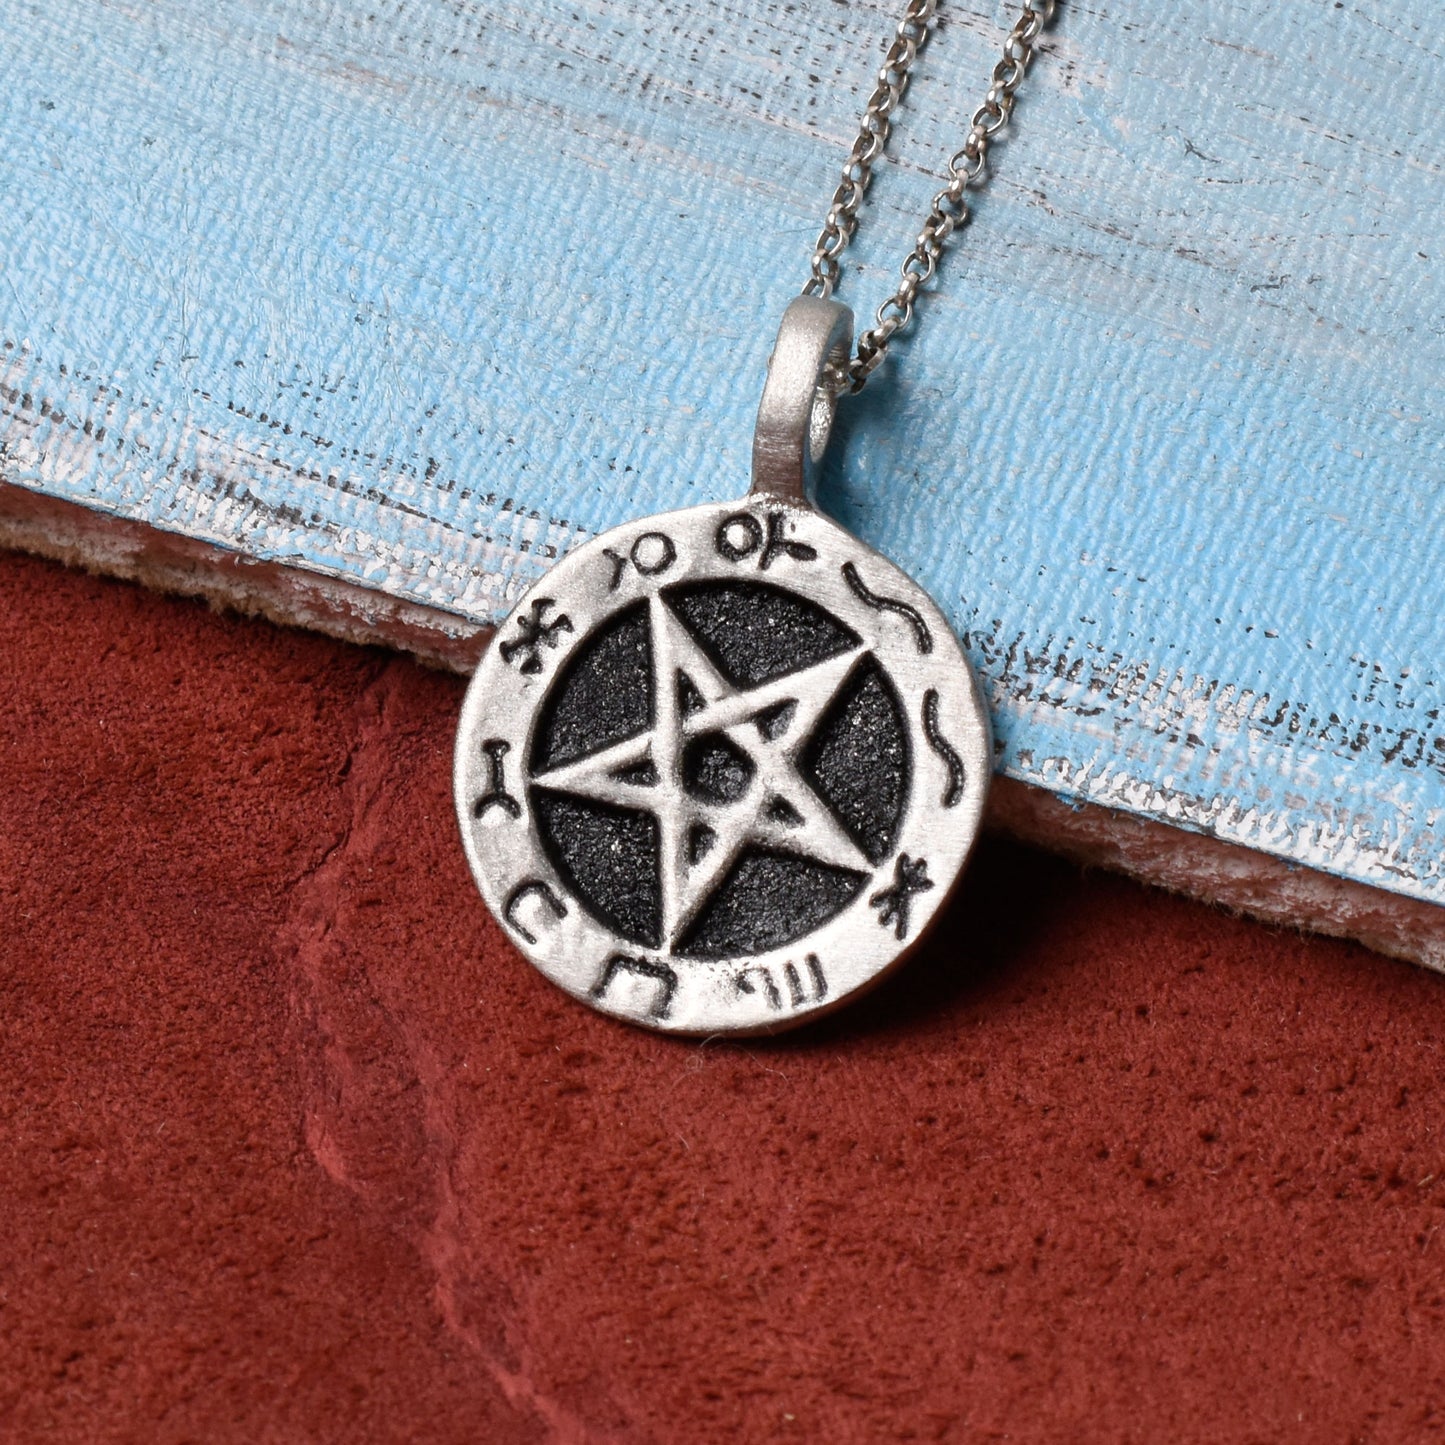 Handmade Pentagram 5-Pointed Star Silver Pewter Charm Necklace Pendant Jewelry